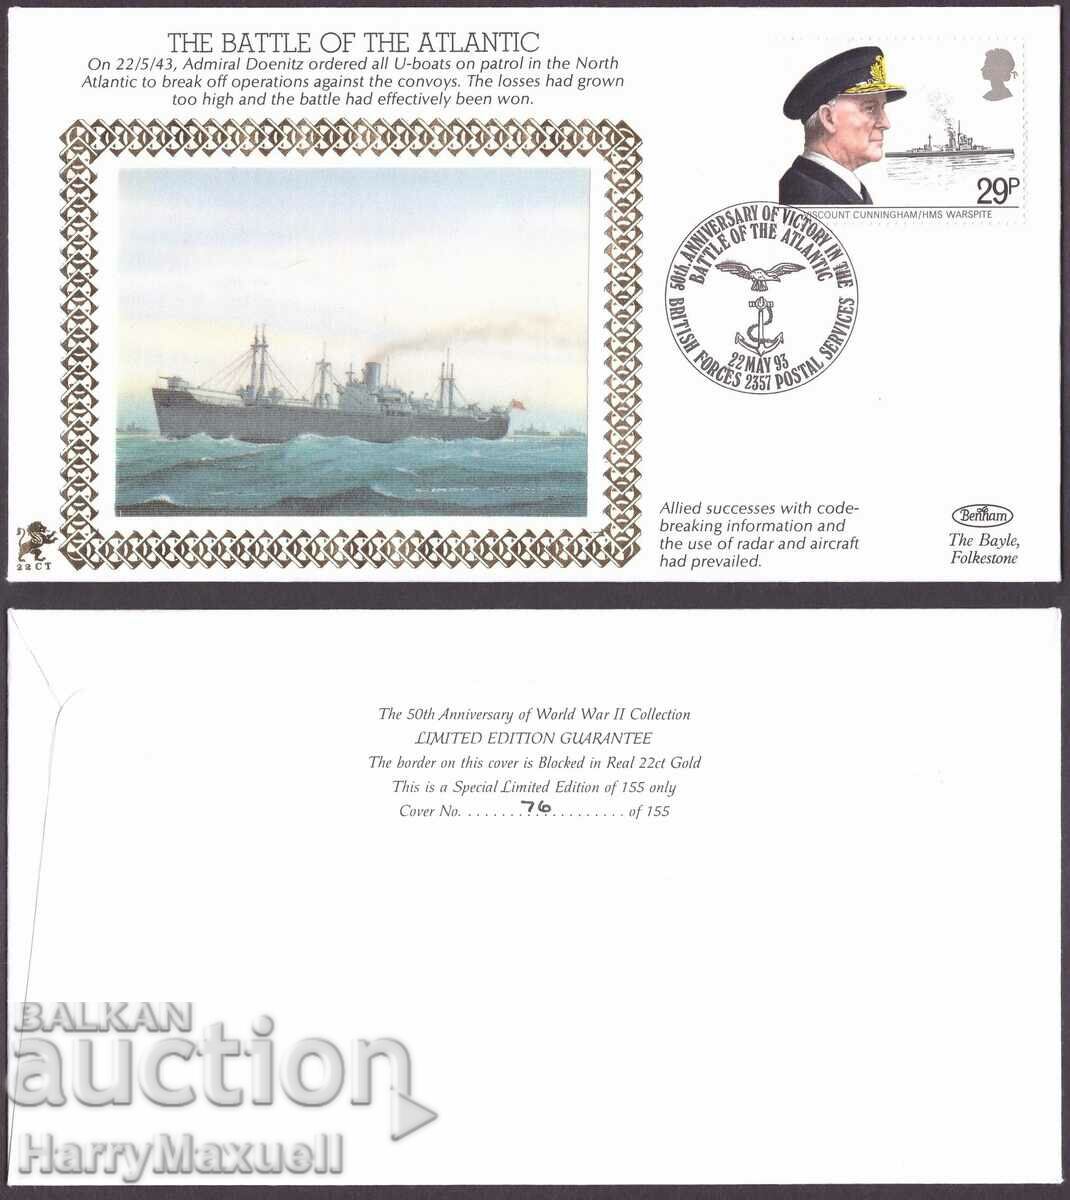 FDC First Day Envelope (FDP) Great Britain 1993. Ship